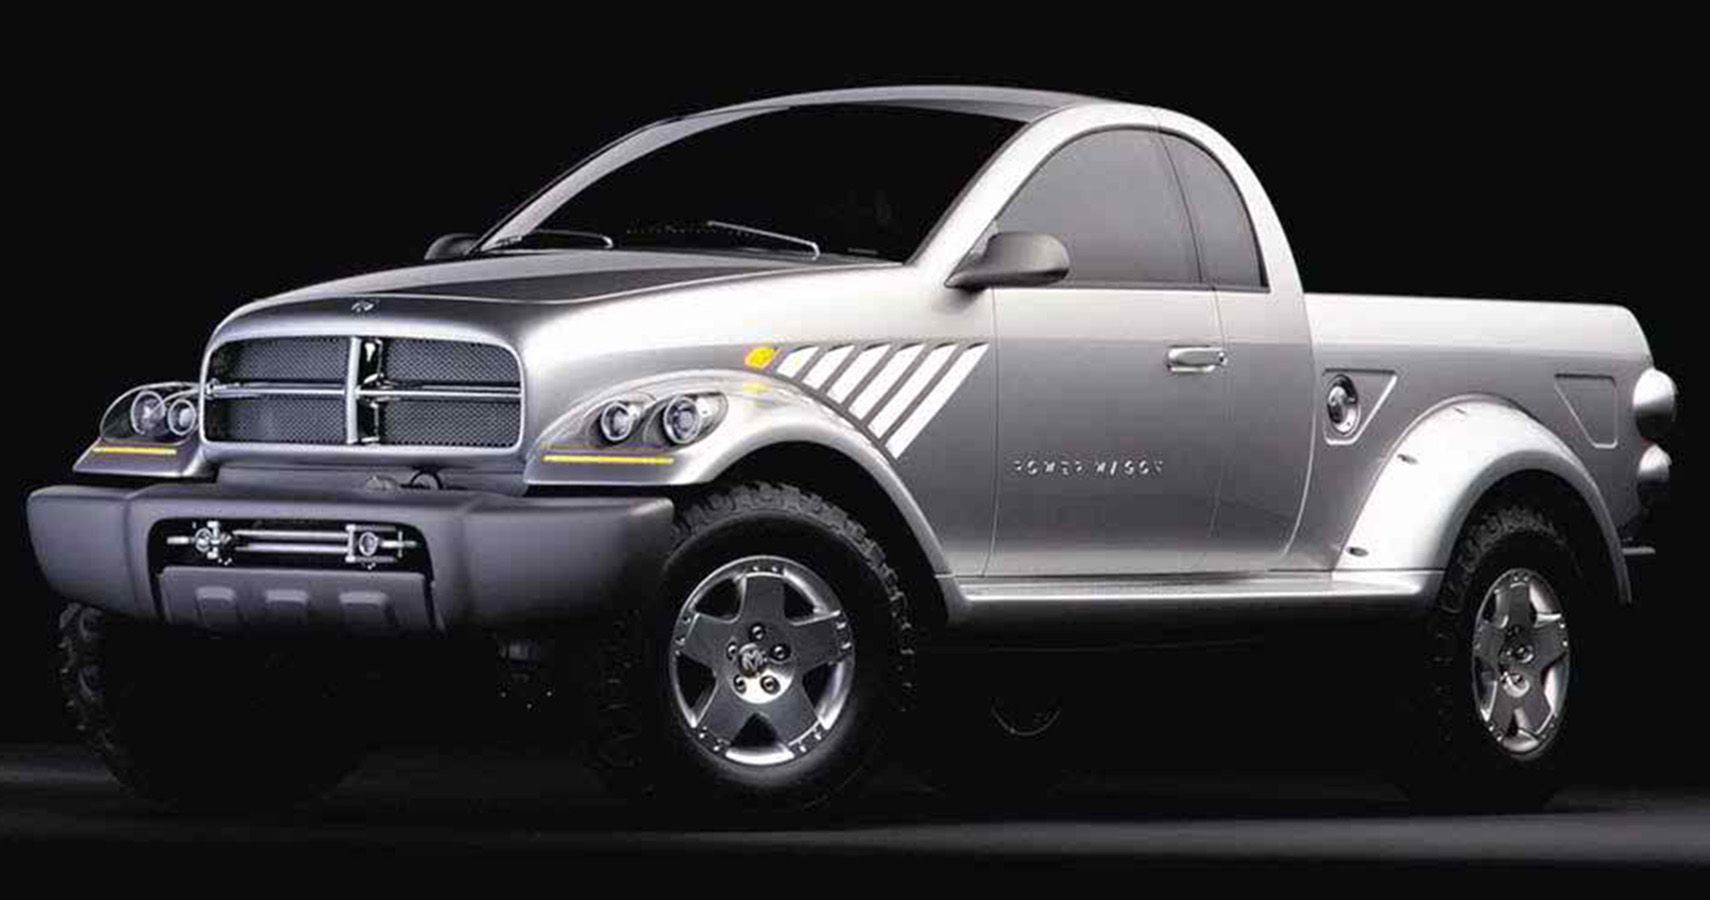 1999 Dodge Power Wagon: From Concept To Just A Trim